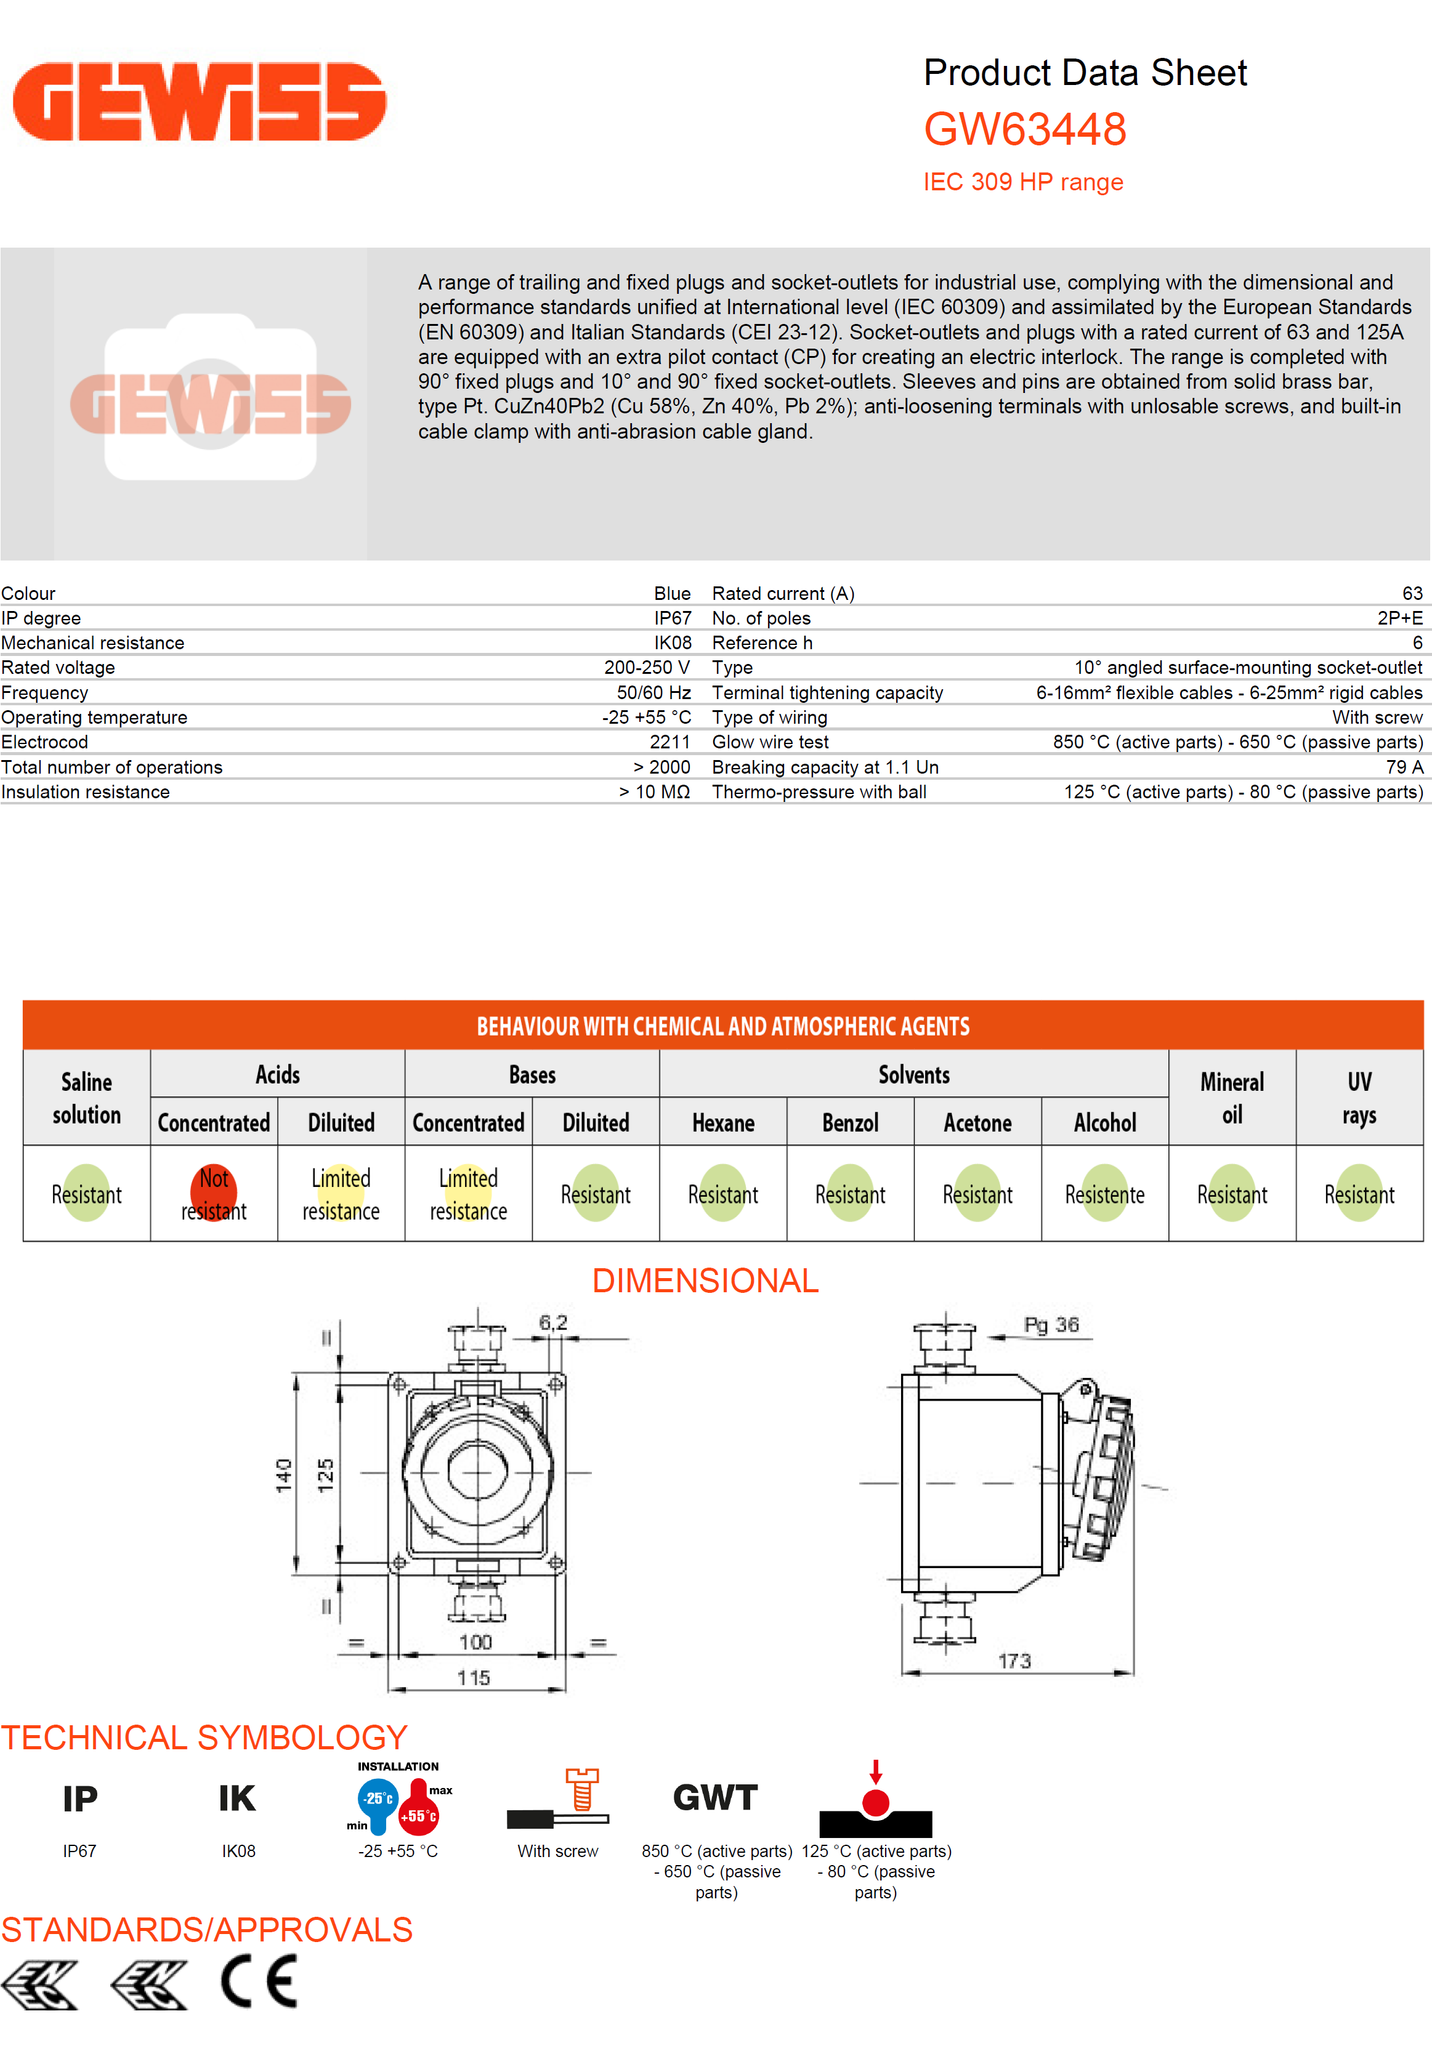 Gewiss 10° Angled Surface-Mounting Socket-Outlet-IP67-2P+E 63A 200-250V 50/60HZ Model# GW63448